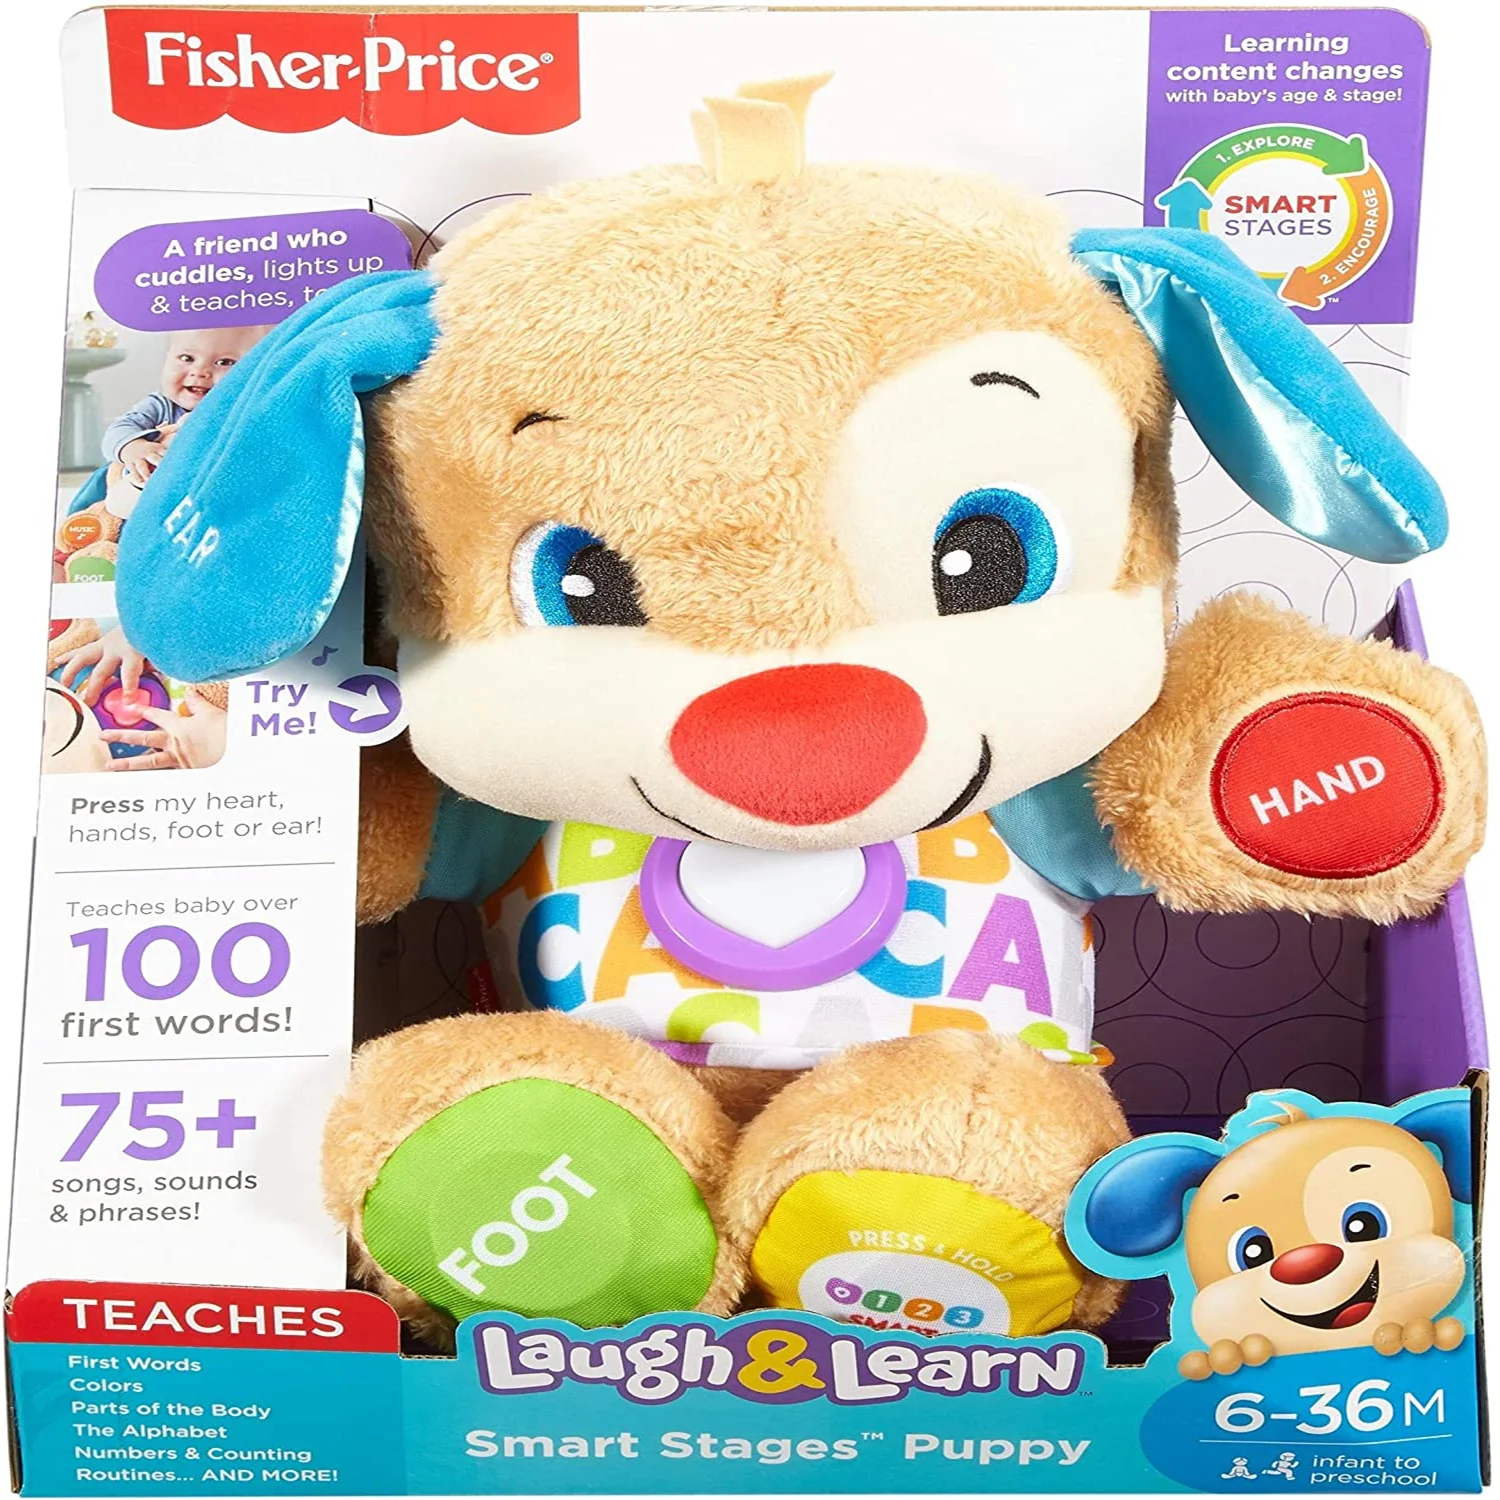 

Fisher-Price Laugh &amp Learn Smart Stages Puppy Music 3-36 Months Baby Early Education Toys Baby Toys